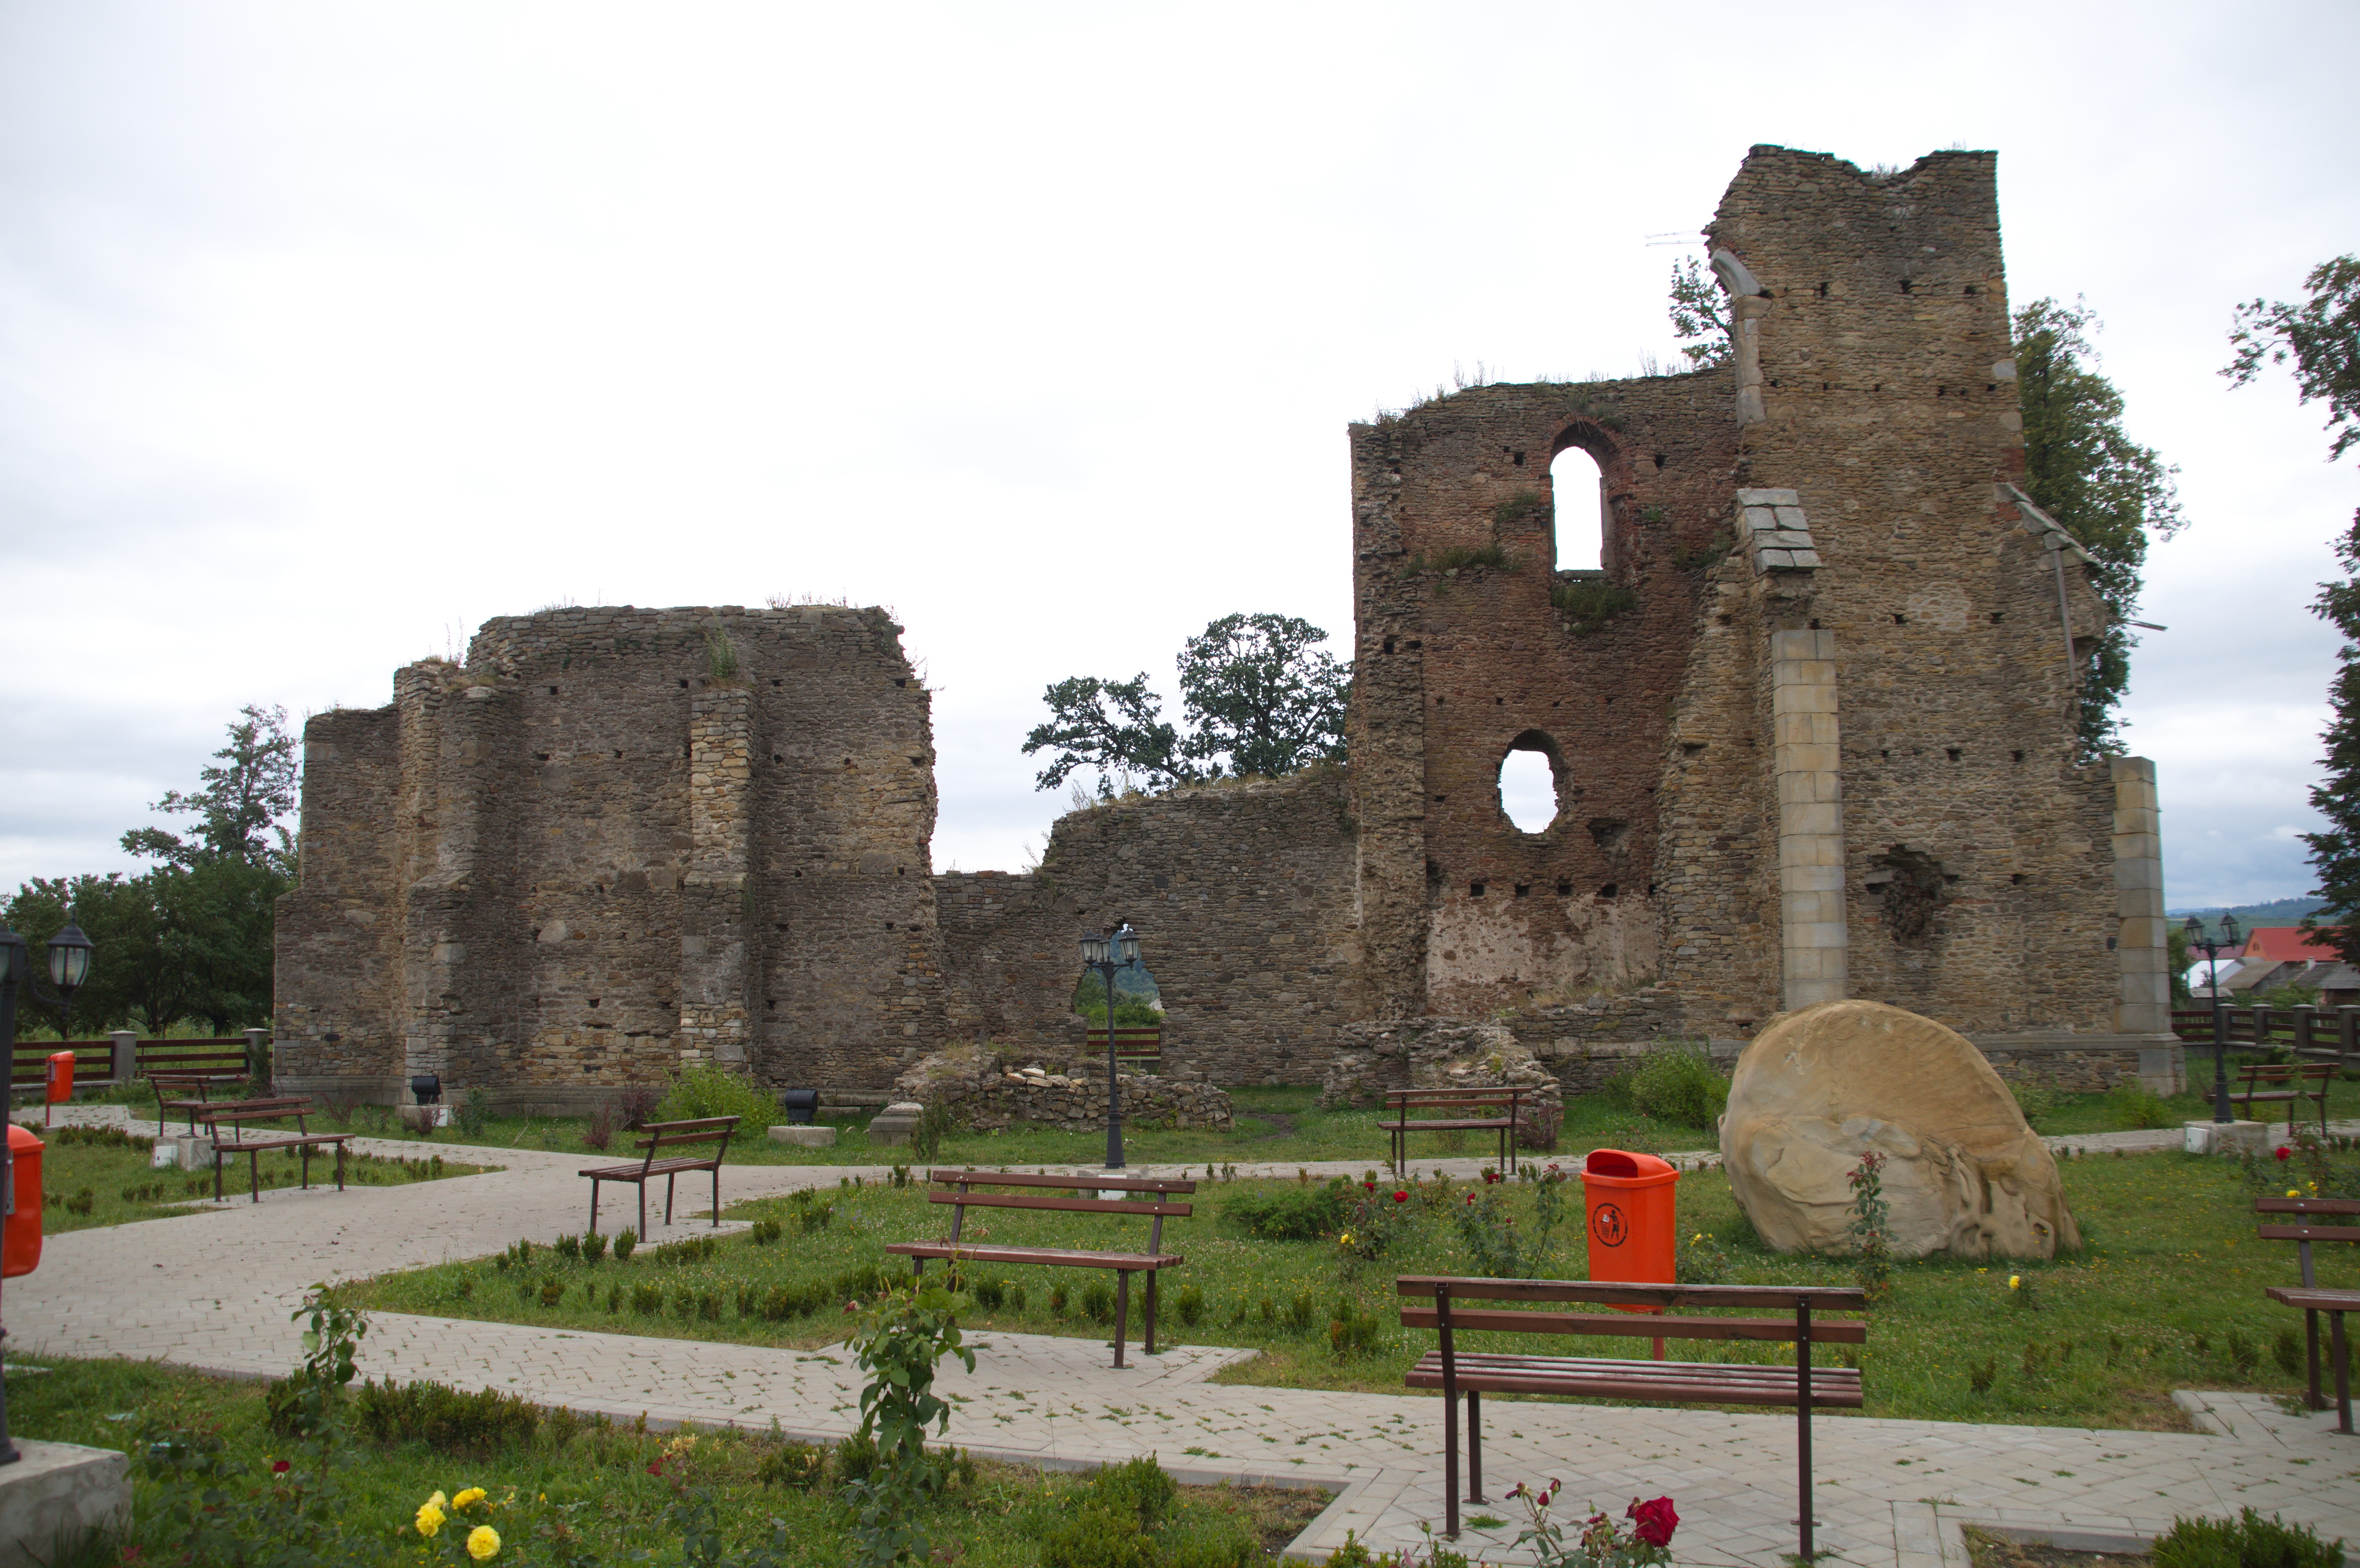 The Ruins of ”Saint Mary the Virgin” Church (Catholic Cathedral)